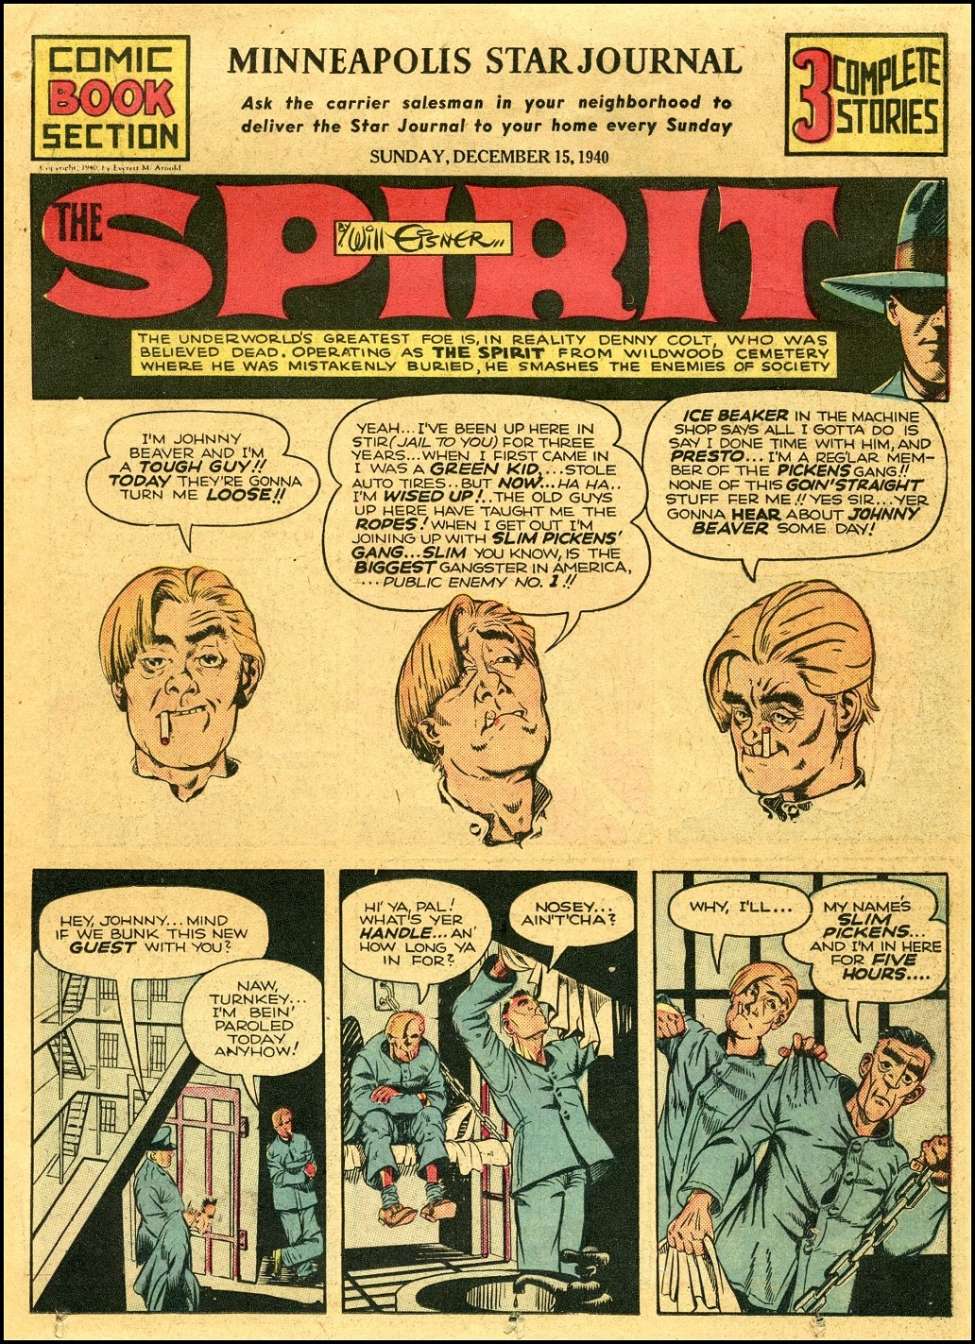 Book Cover For The Spirit (1940-12-15) - Minneapolis Star Journal